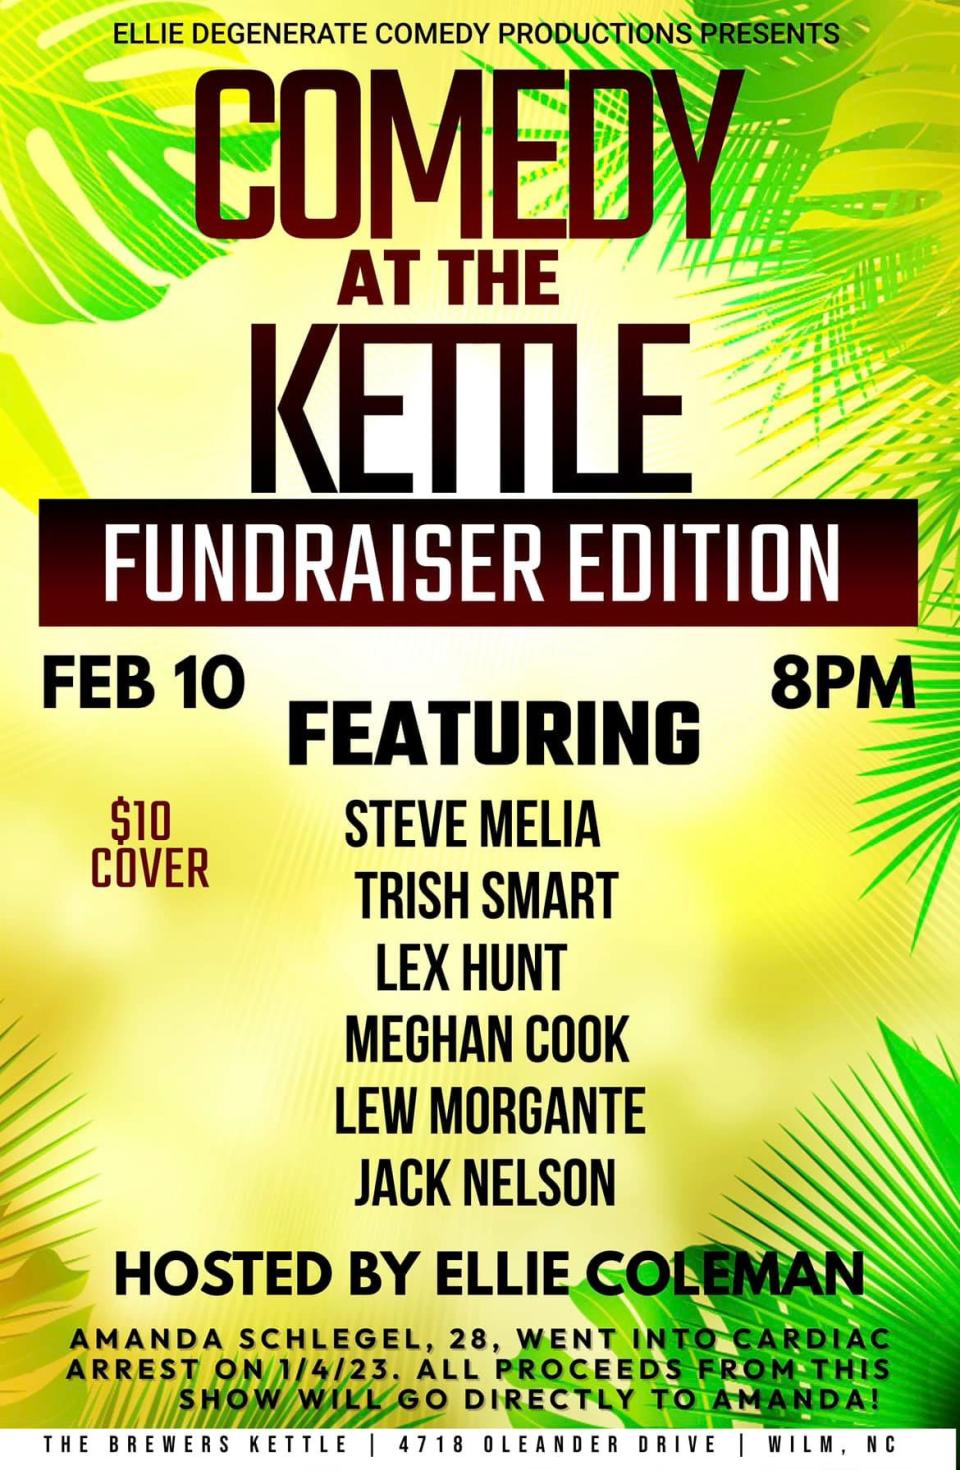 Comedy at the Kettle is held at The Brewer's Kettle on Oleander Drive.